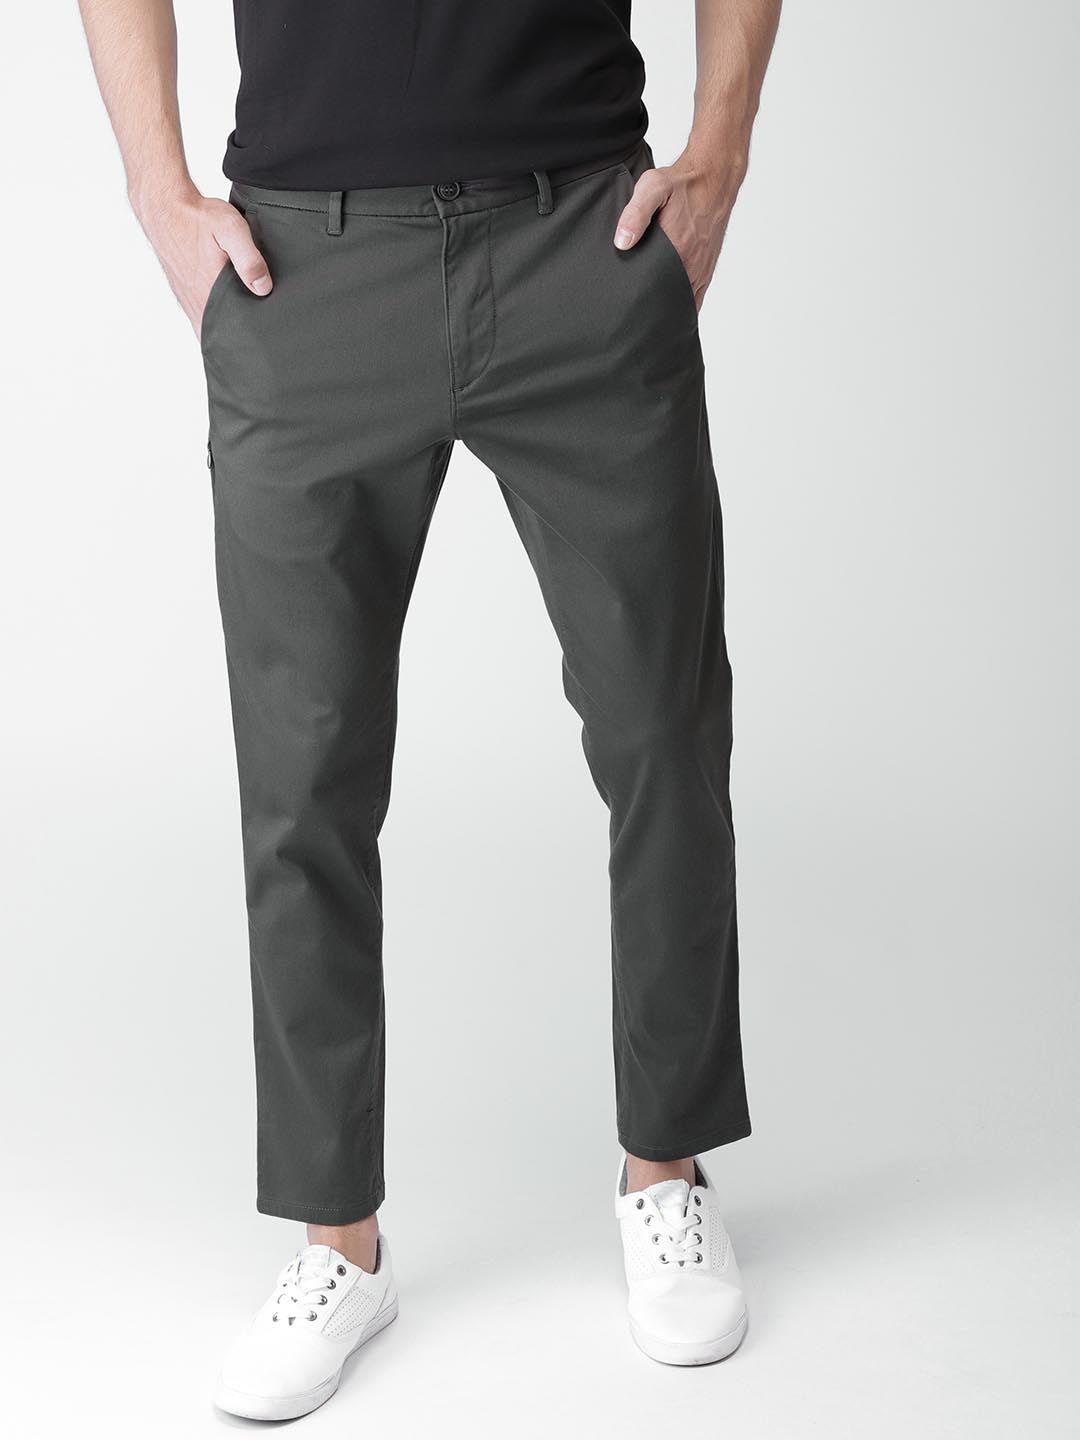 Buy Mast & Harbour Men Charcoal Grey Slim Fit Solid Chinos - Trousers ...